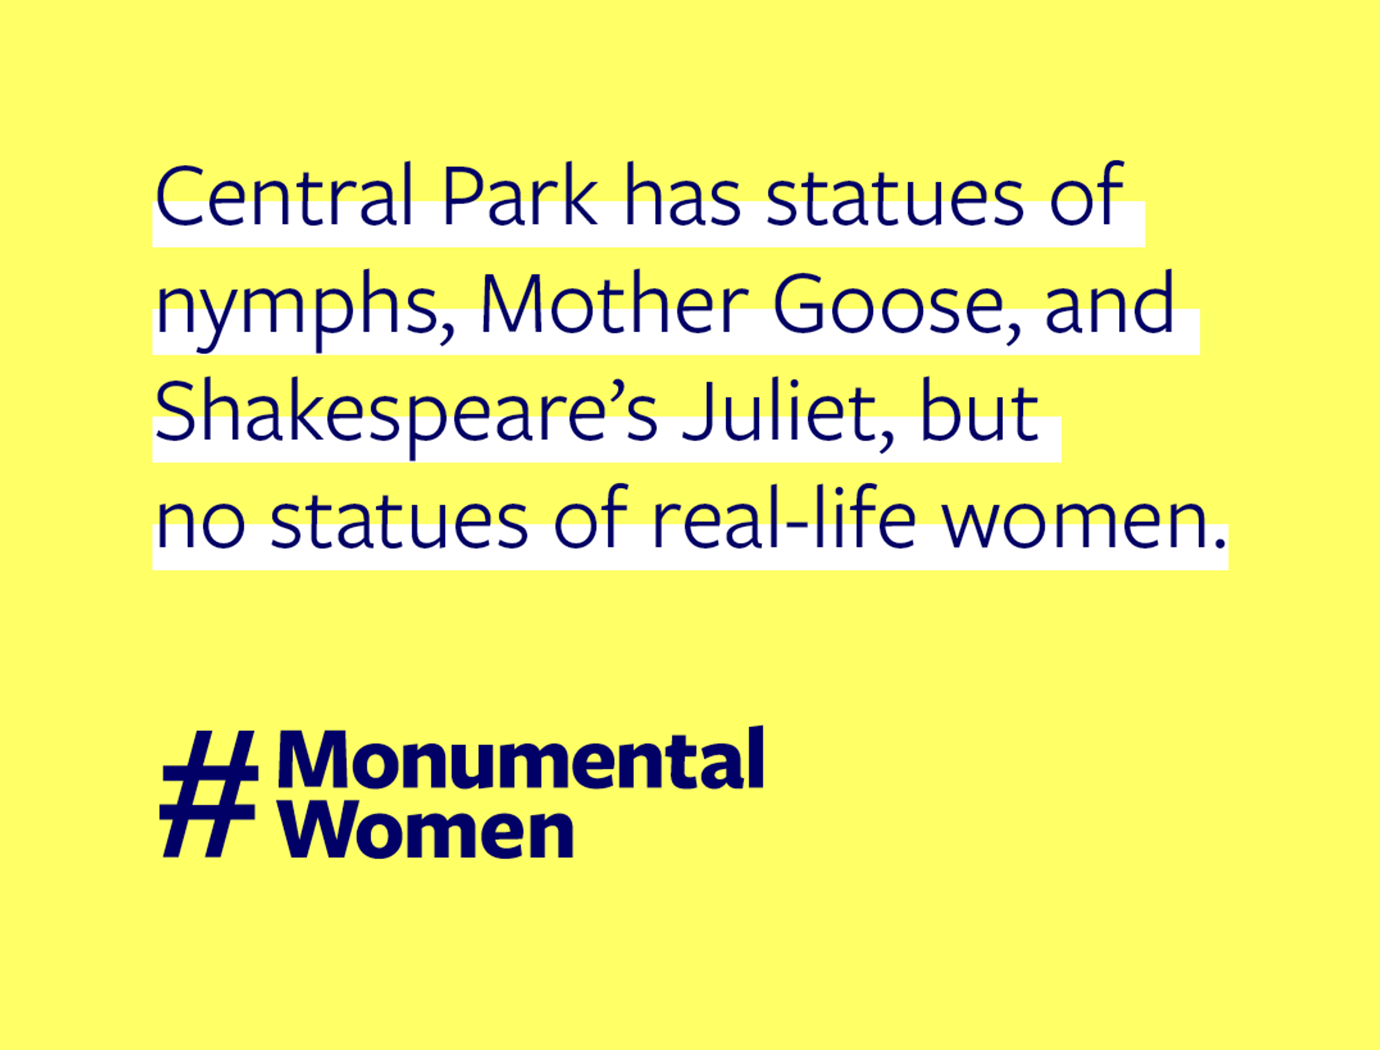 The statement "Central Park has statues of nymphs, Mother Goose, and Shakespeare's Juliet, but no statues of real-life women" on a field of yellow with the hashtag "Monumental Women."